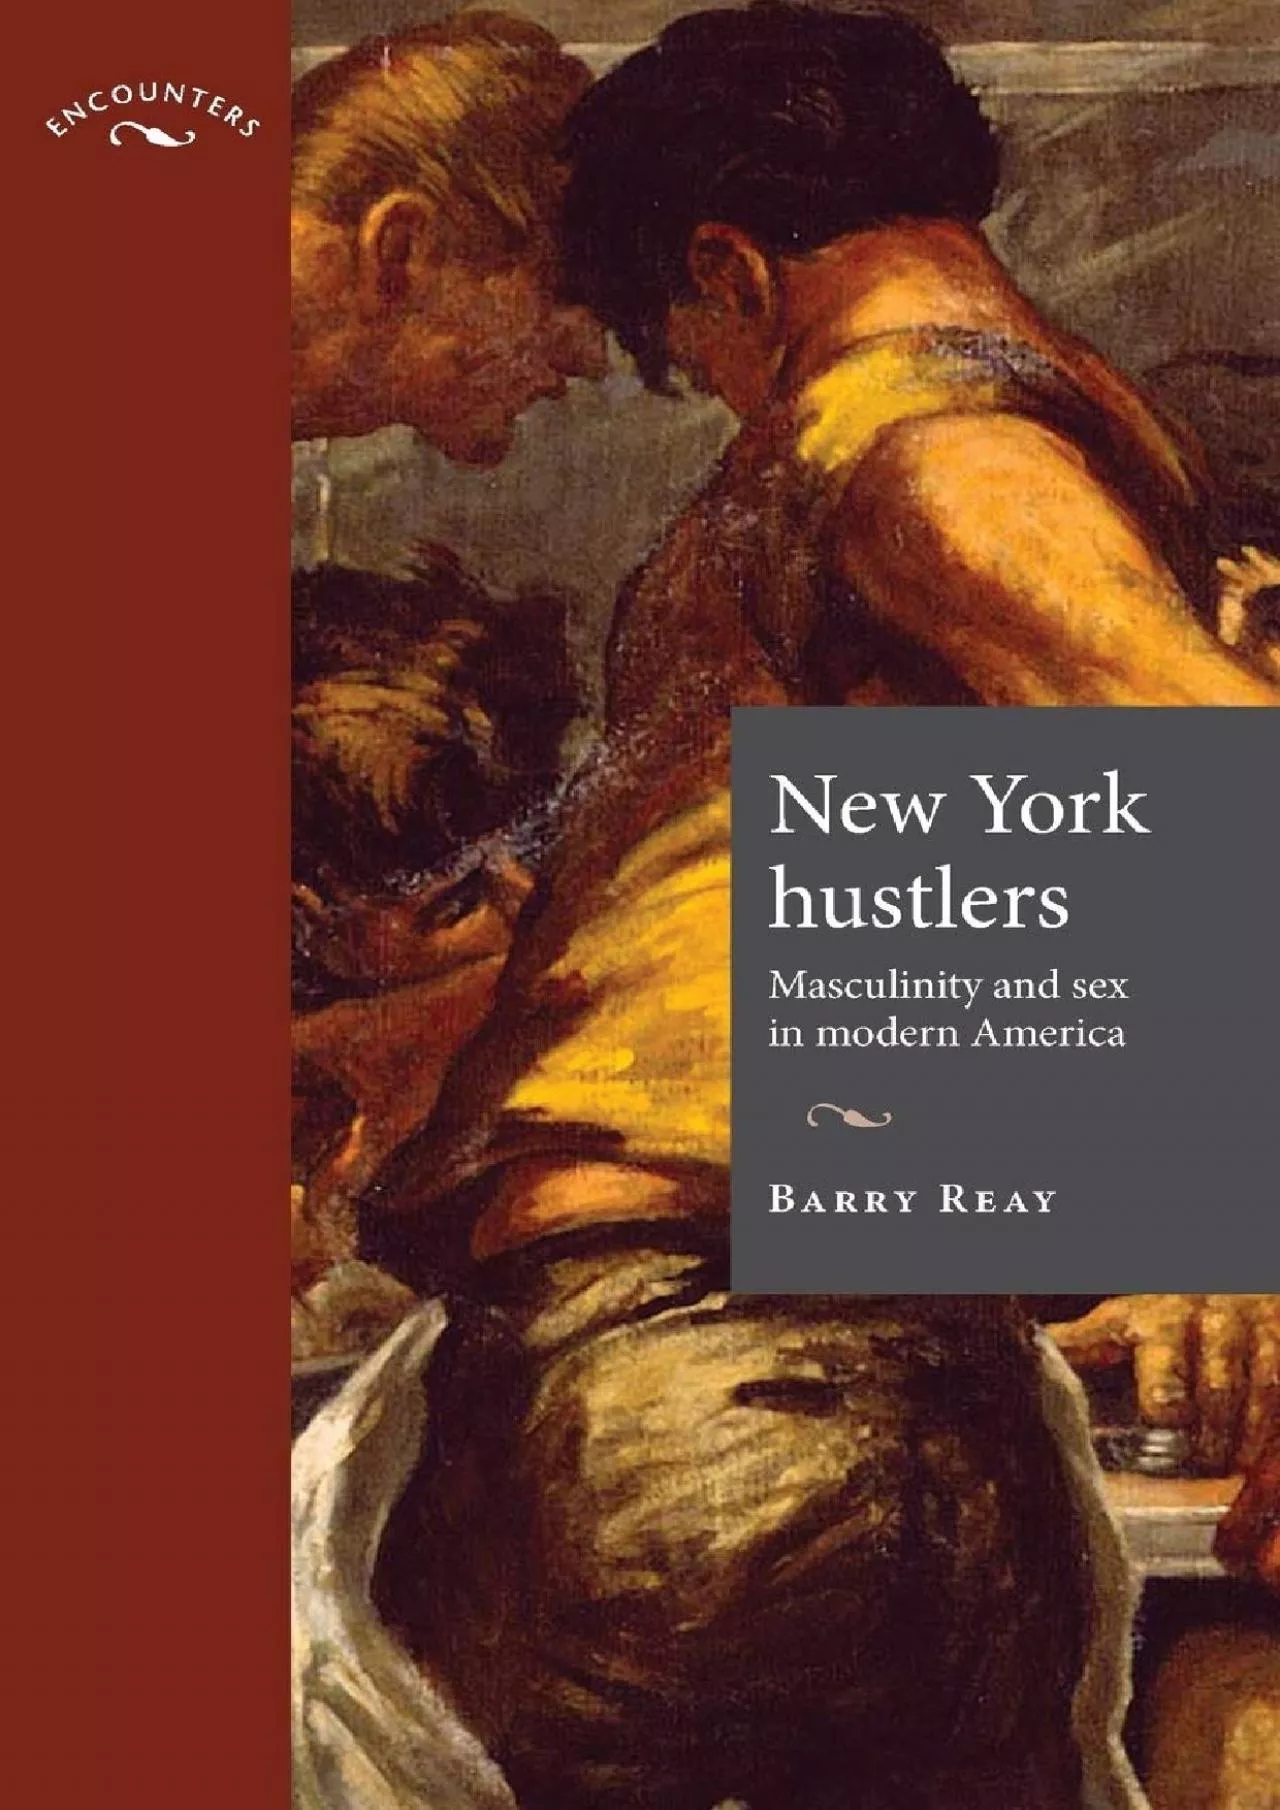 (BOOK)-New York hustlers: Masculinity and sex in modern America (Encounters: Cultural